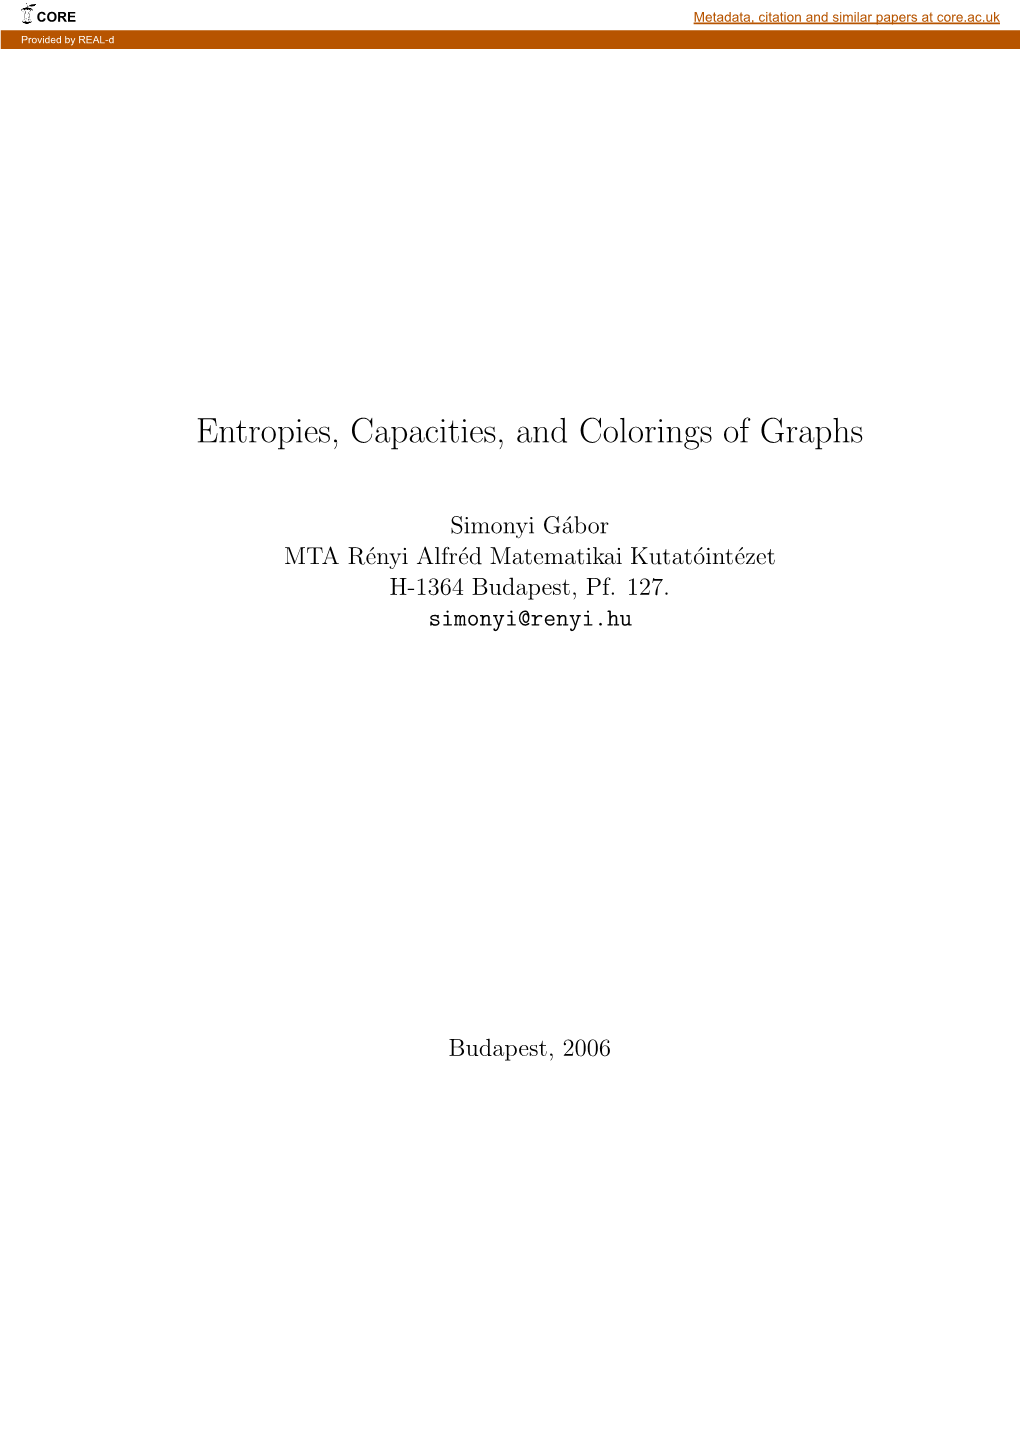 Entropies, Capacities, and Colorings of Graphs